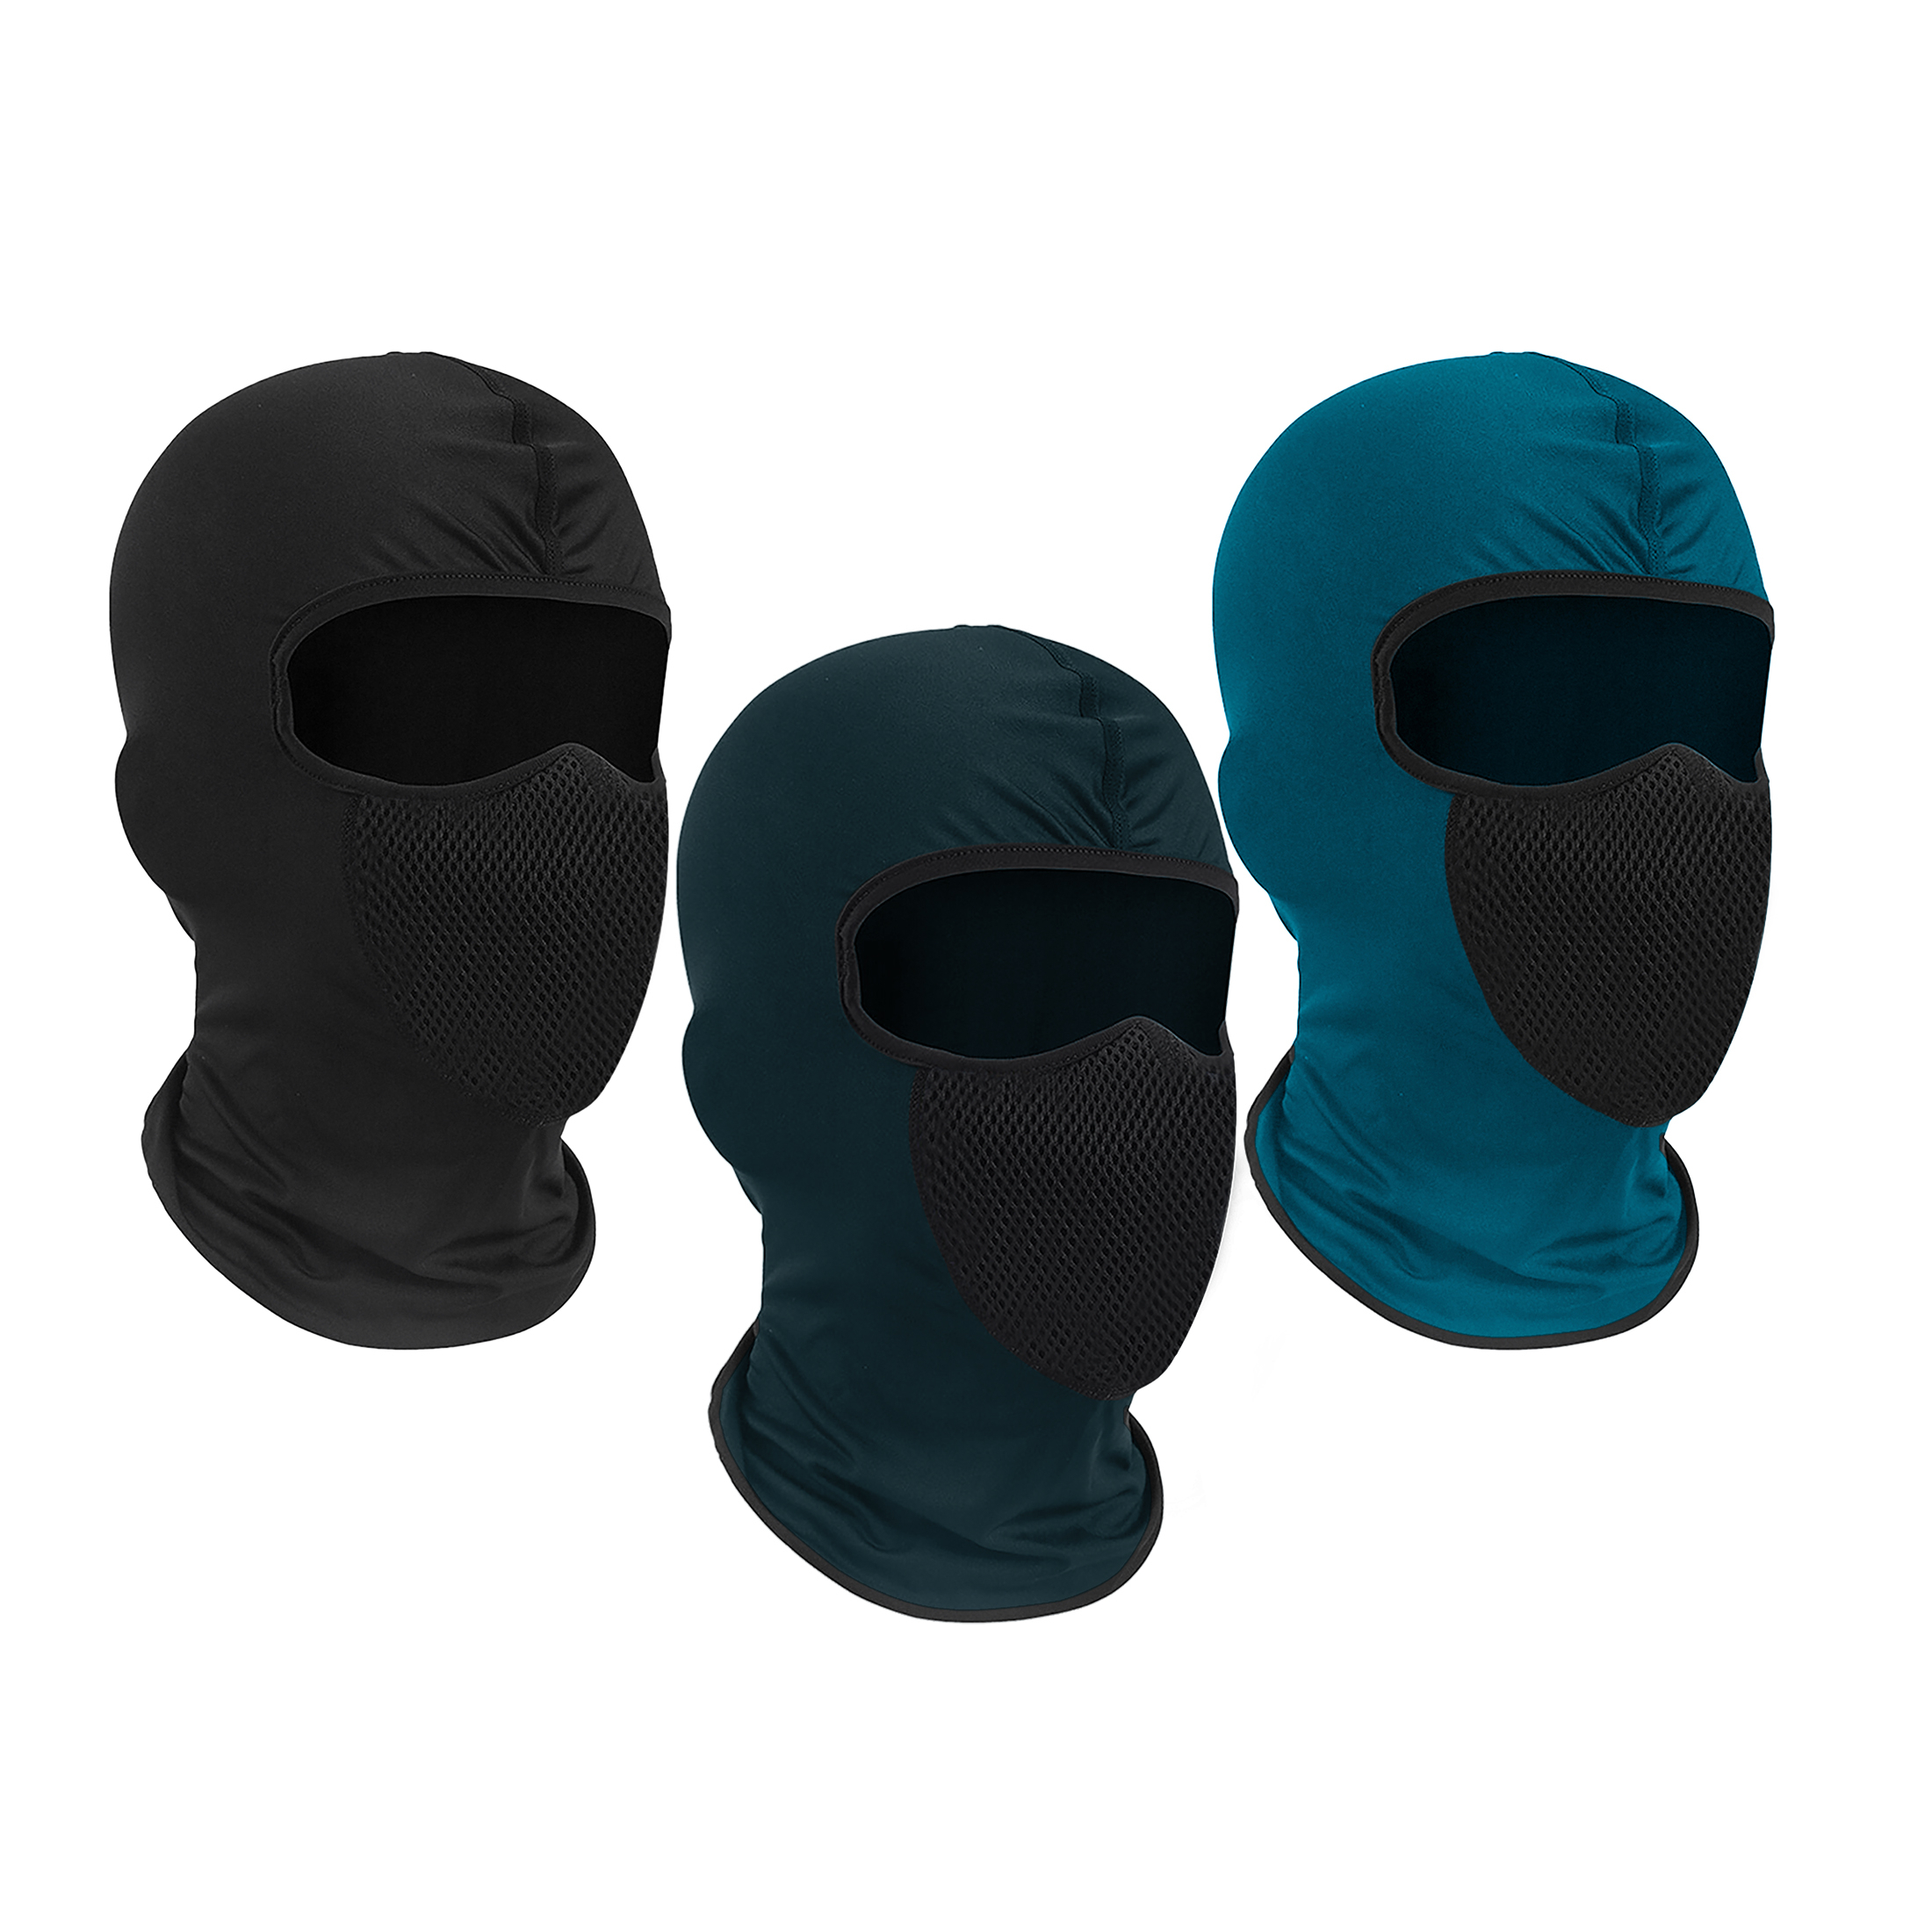 2-Pack: Men's Warm Winter Windproof Breathable Cozy Thermal Balaclava Winter Ski Full Face Mask - Black & Blue